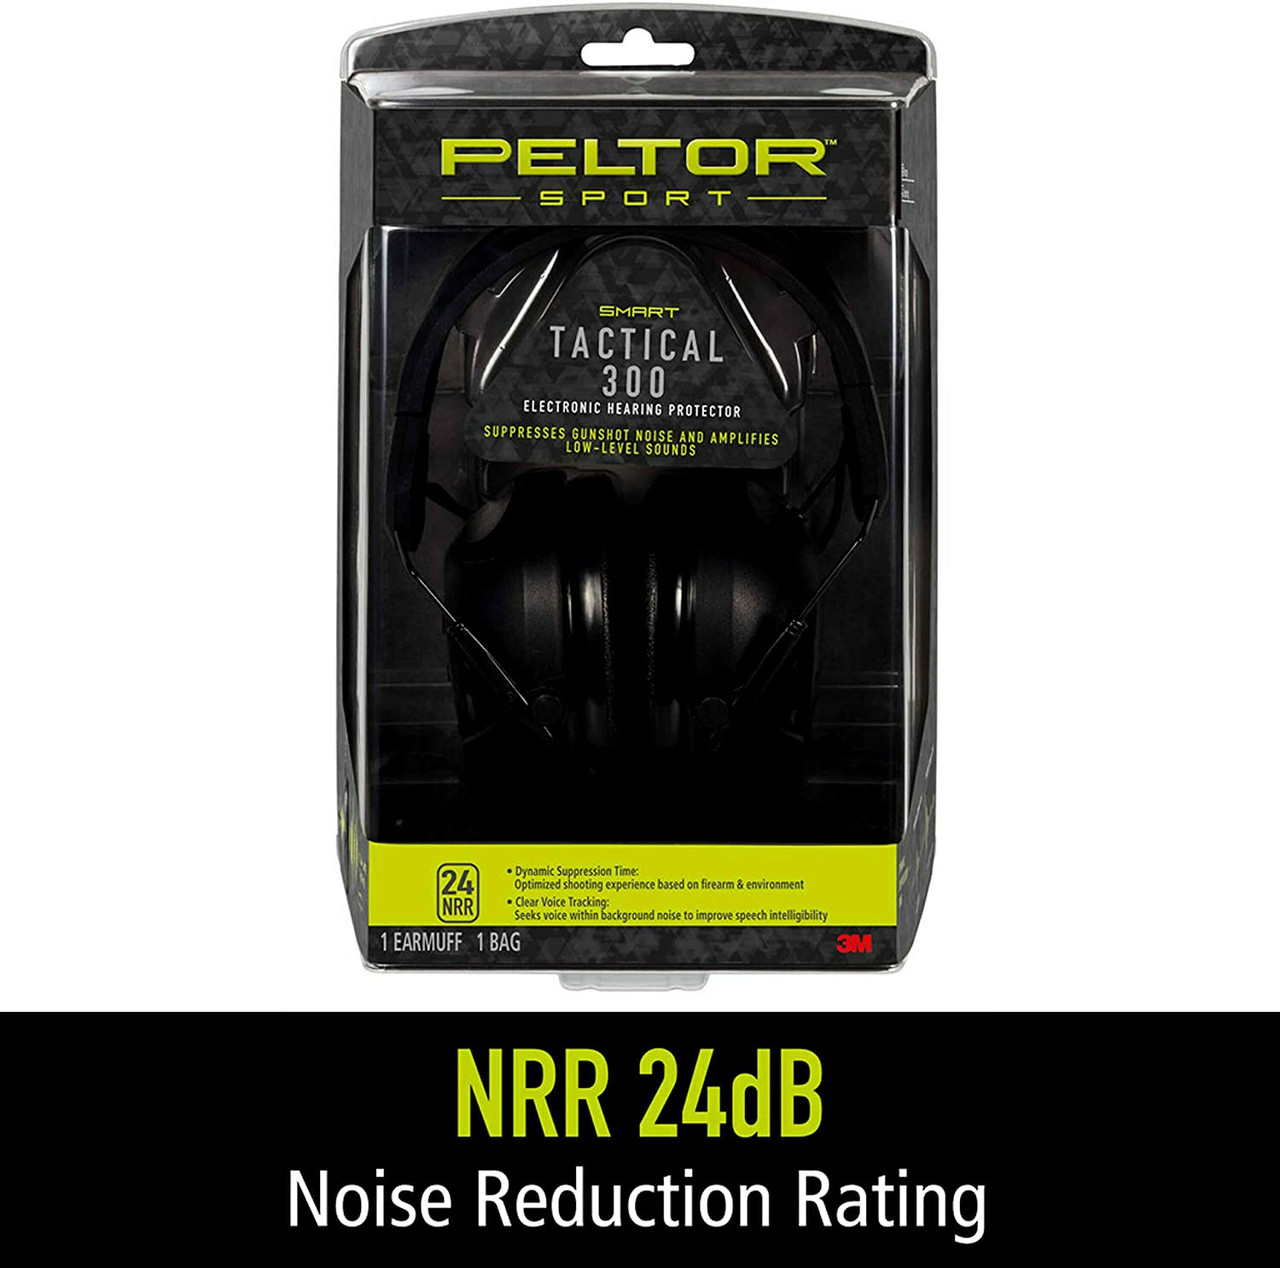 PELTOR™ Sport Tactical 300 Electronic Hearing Protector - Your